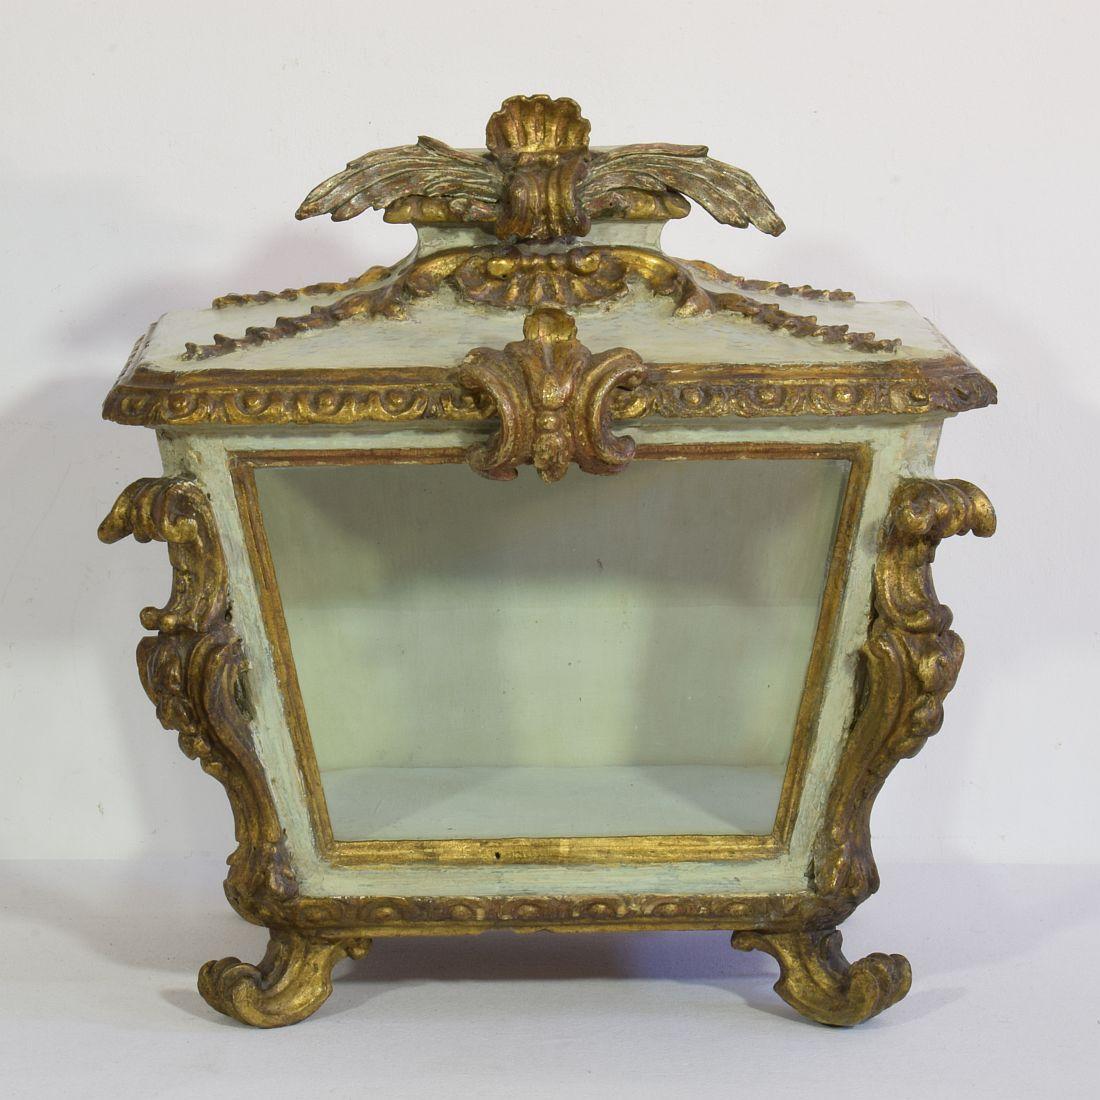 Hand-Carved Italian 18th Century Baroque Carved Wooden Reliquary Shrine